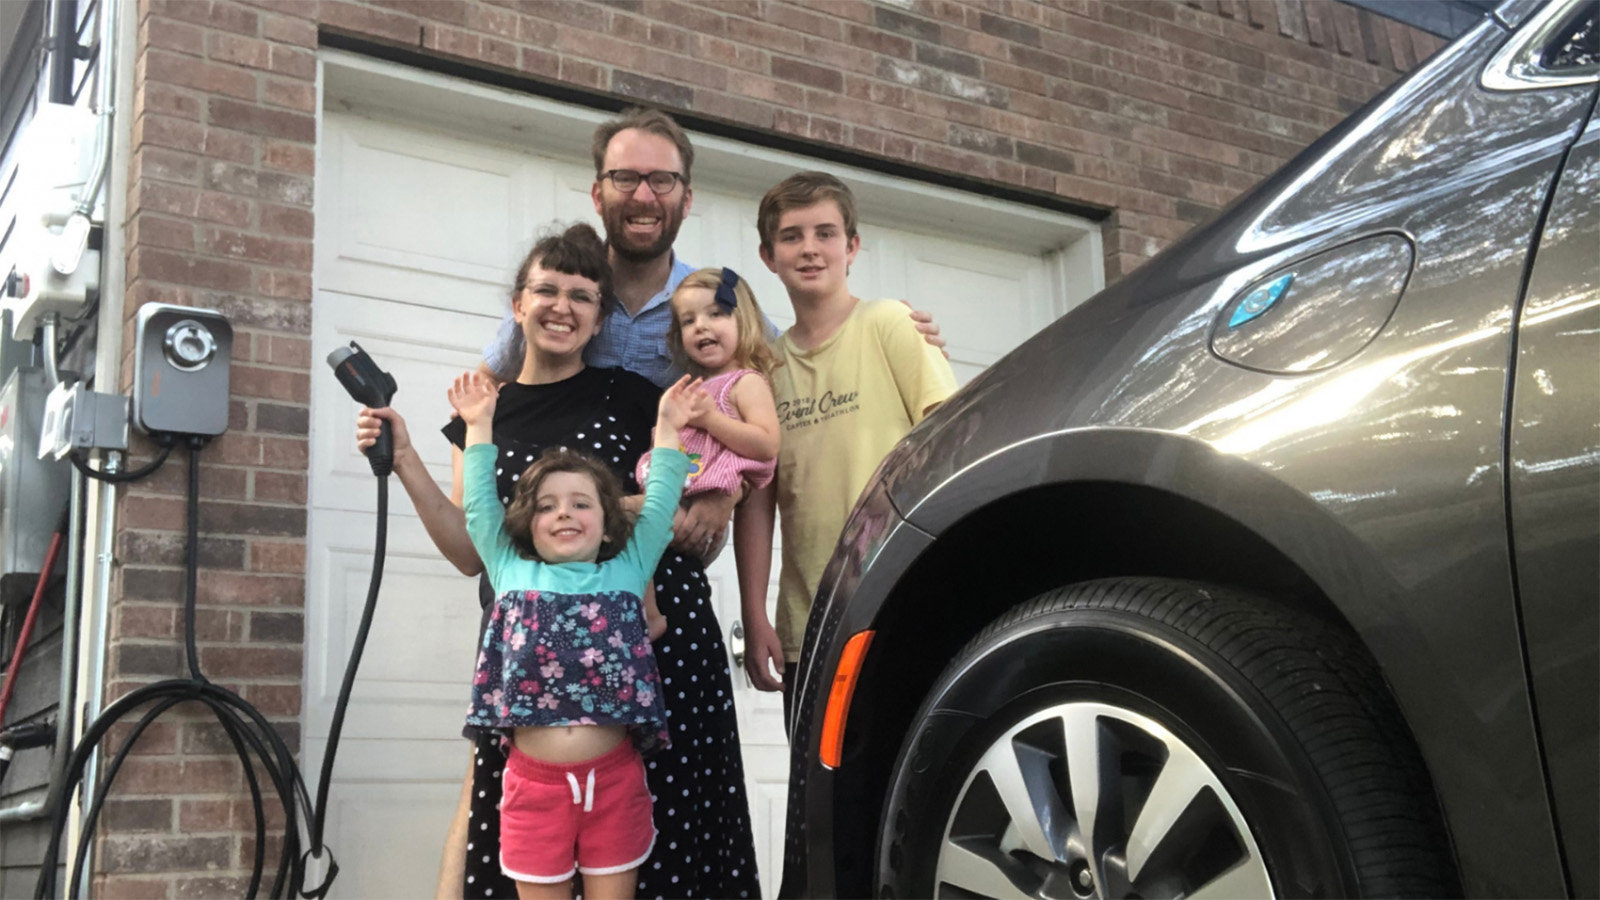 Luke Metzger and family with their EV